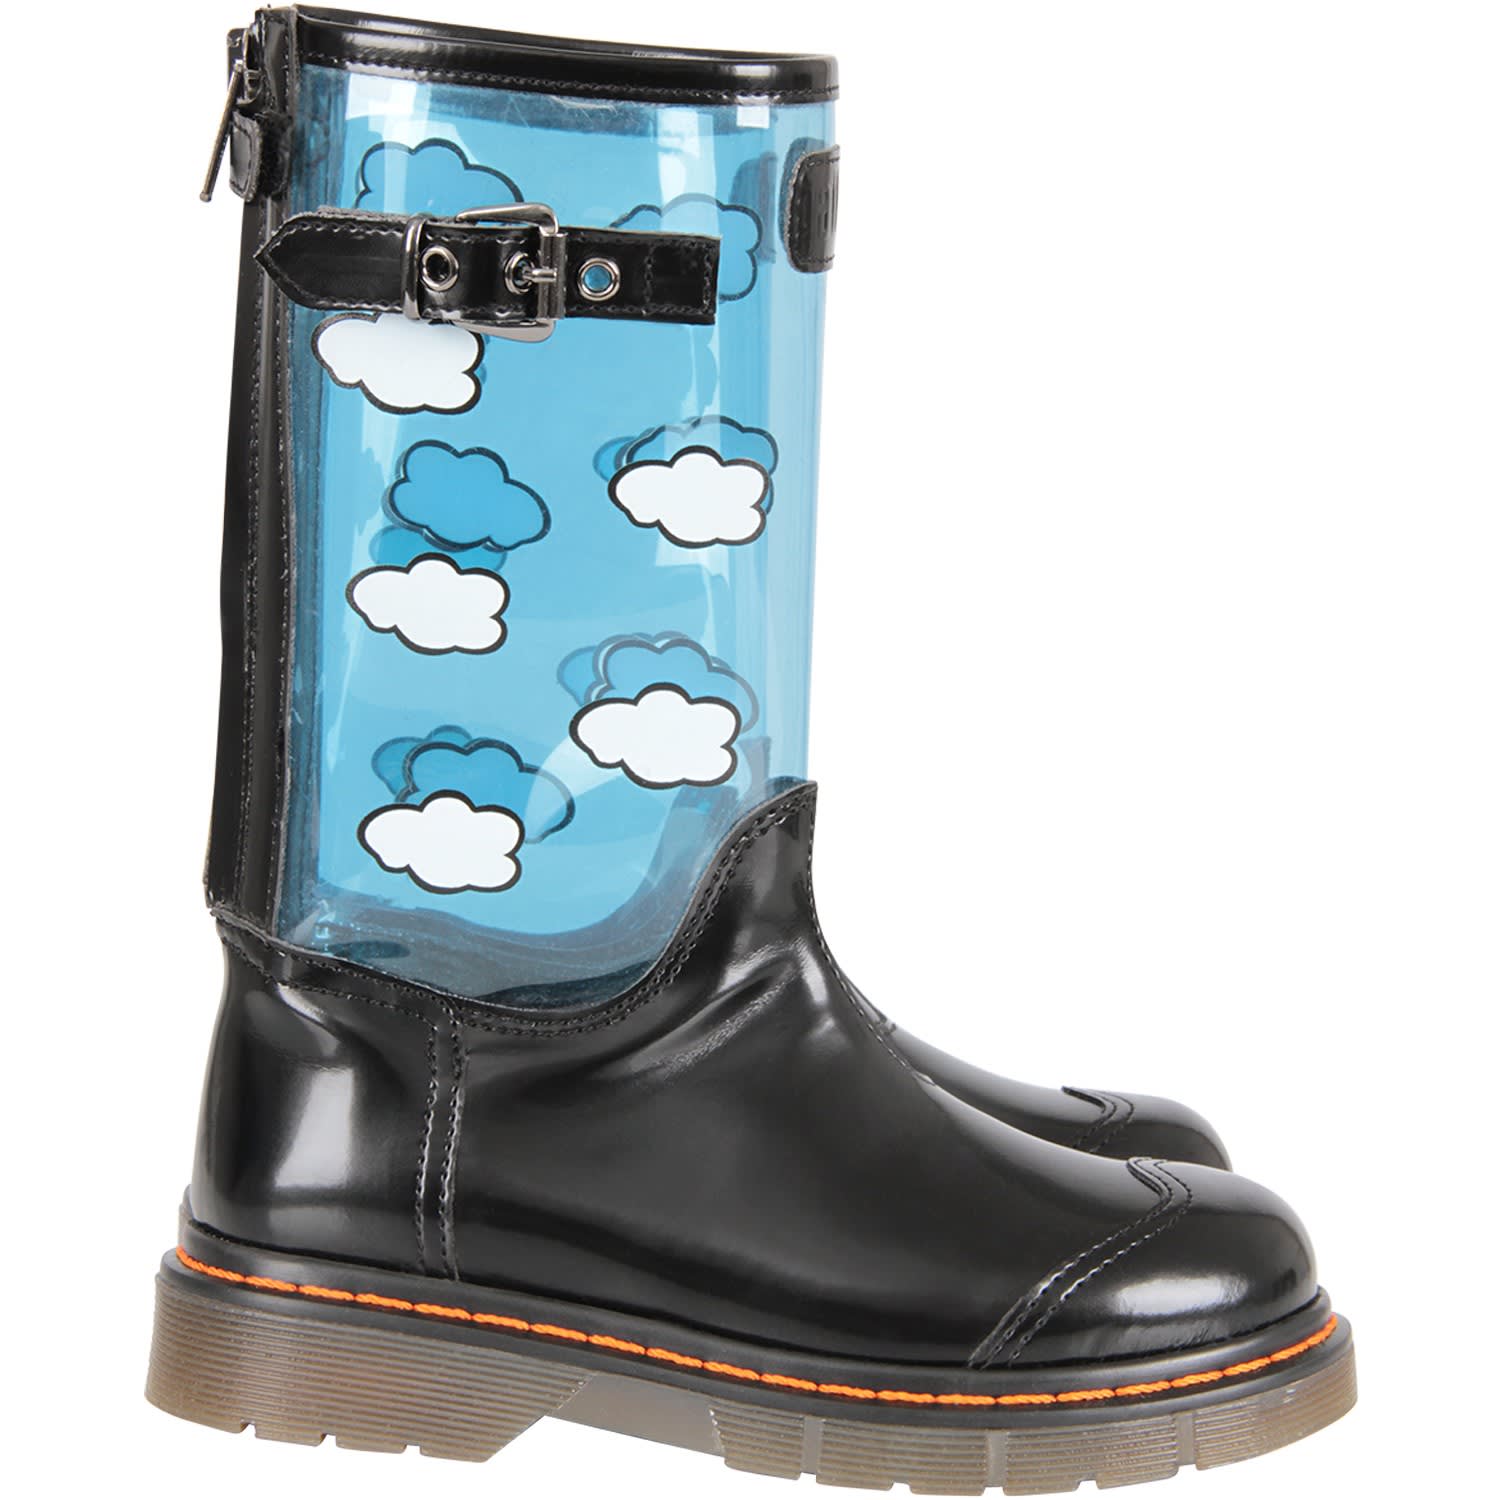 Gallucci Black High Boot With White Clouds For Girl